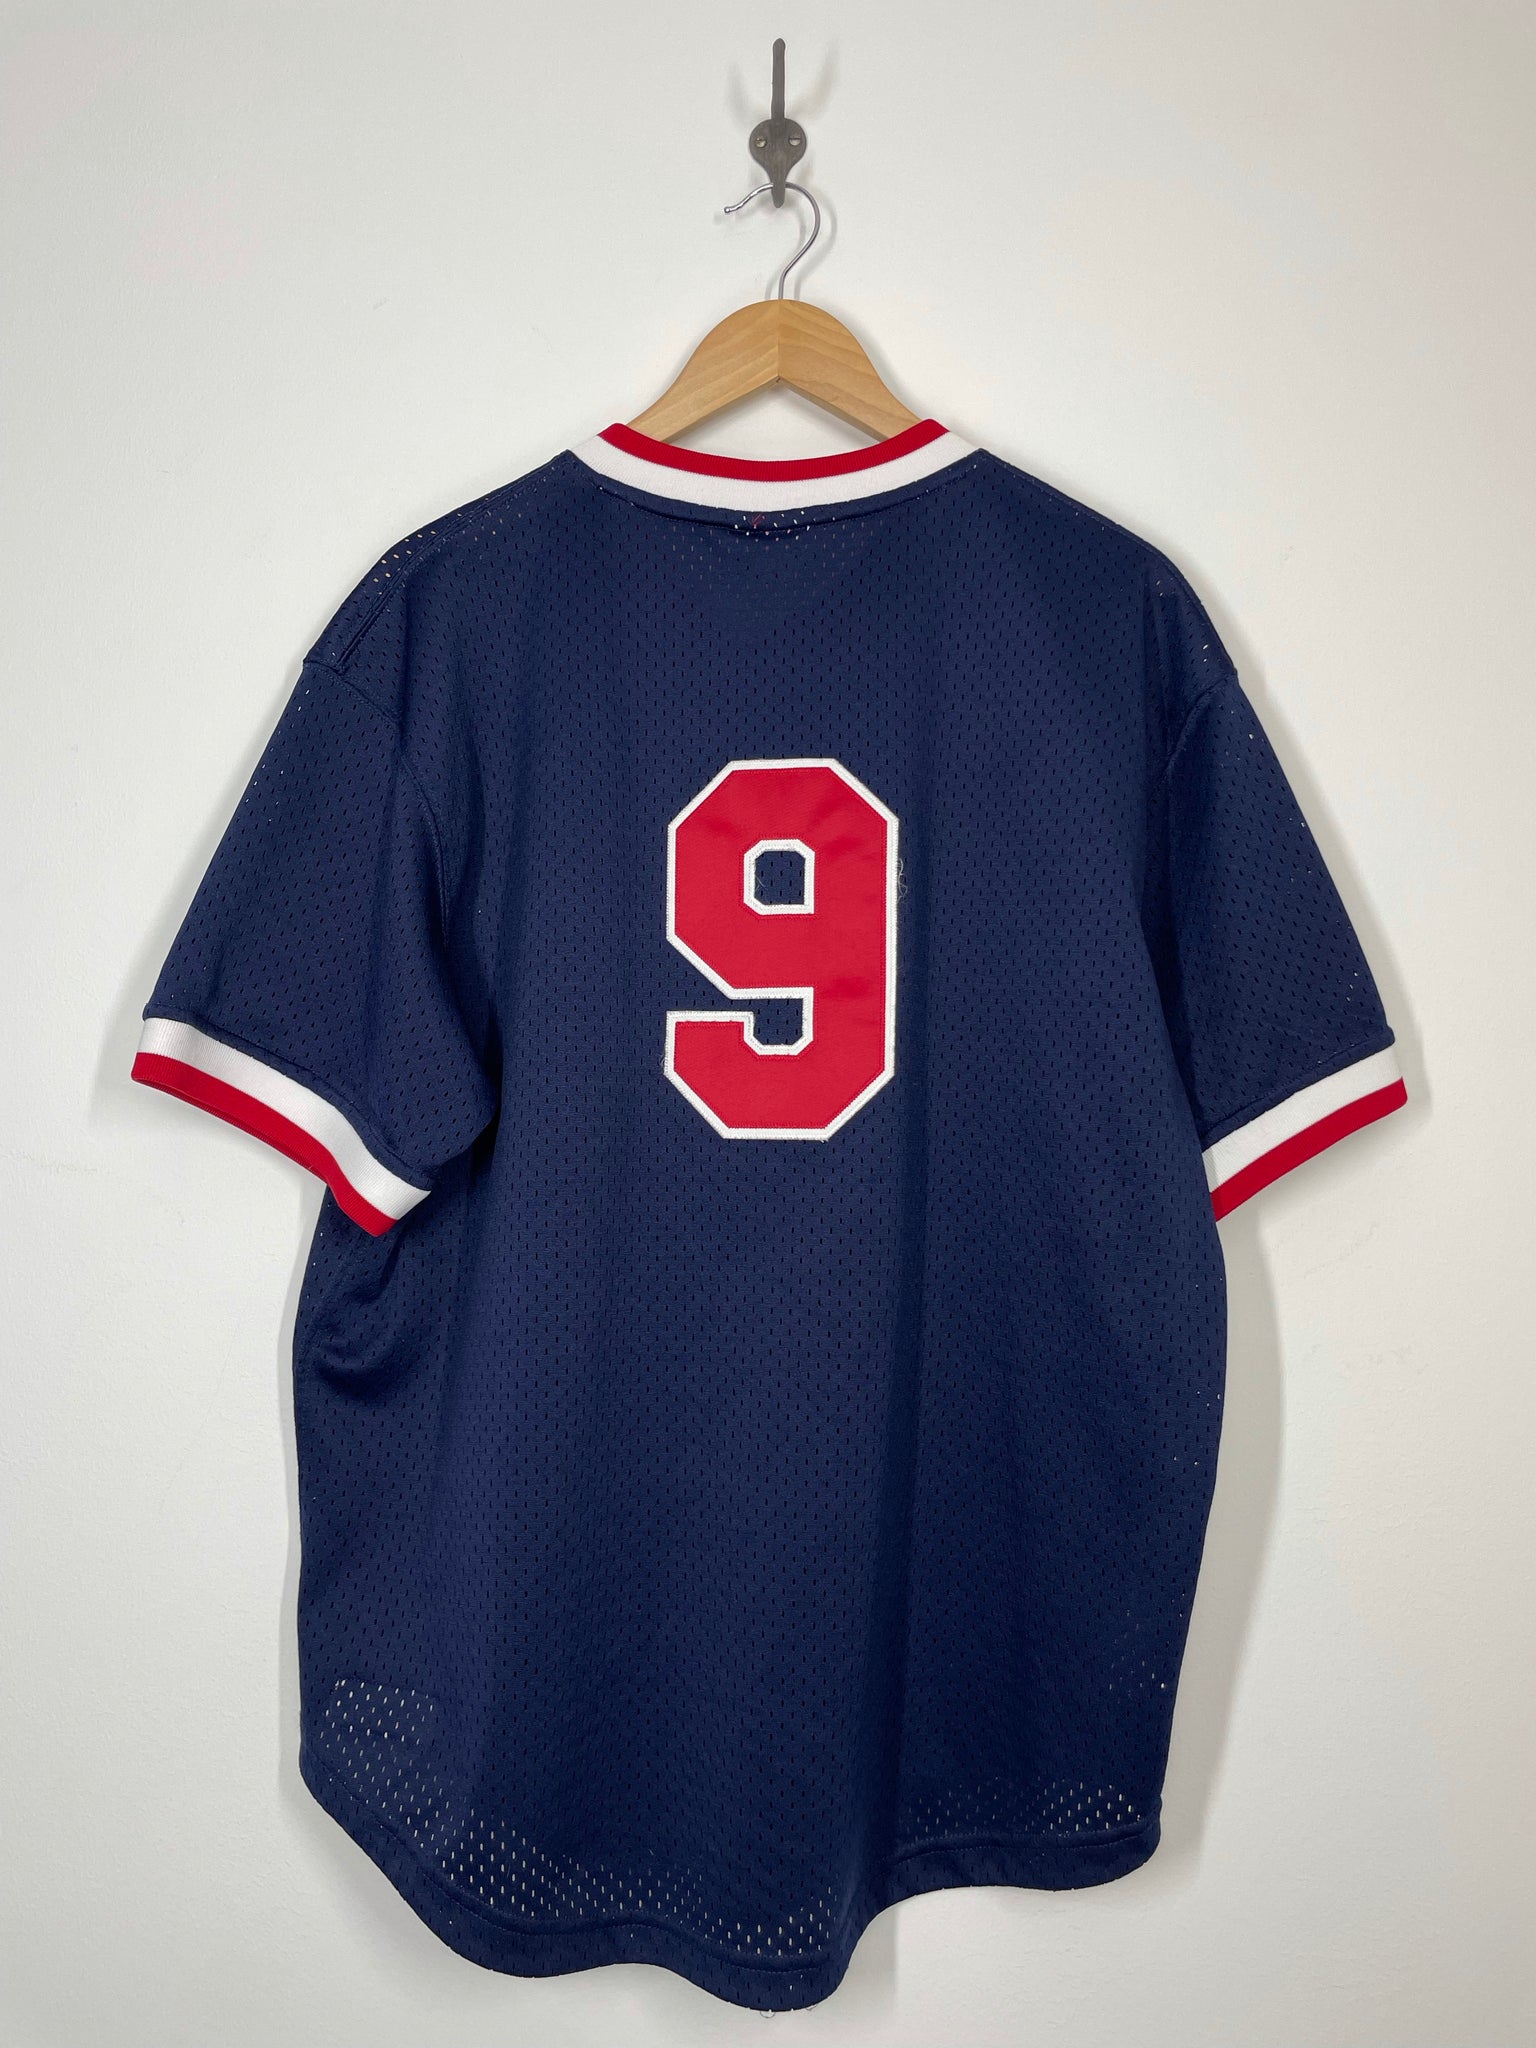 Lhük Vintage MLB Boston Red Sox Baseball Ted Williams 9 Cooperstown Jersey - Mitchell & Ness - XL